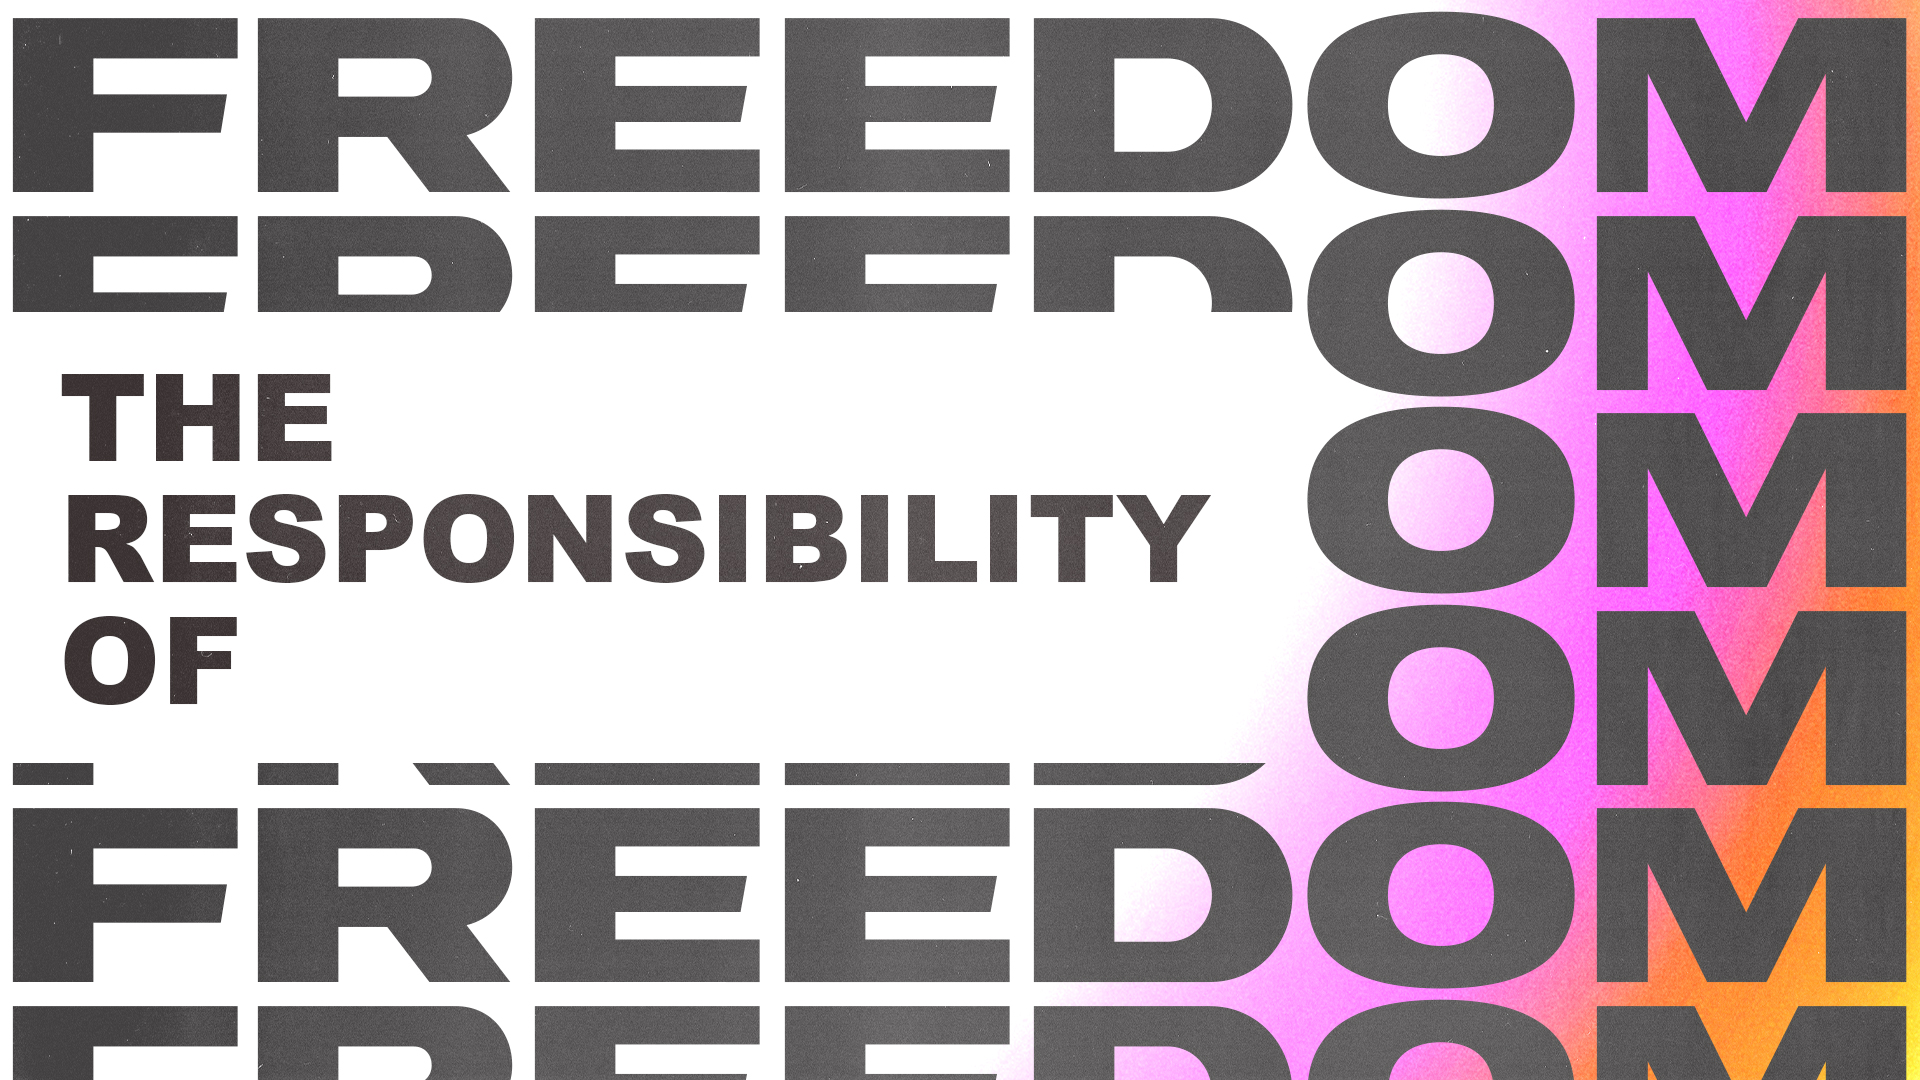 The Responsibility of Freedom